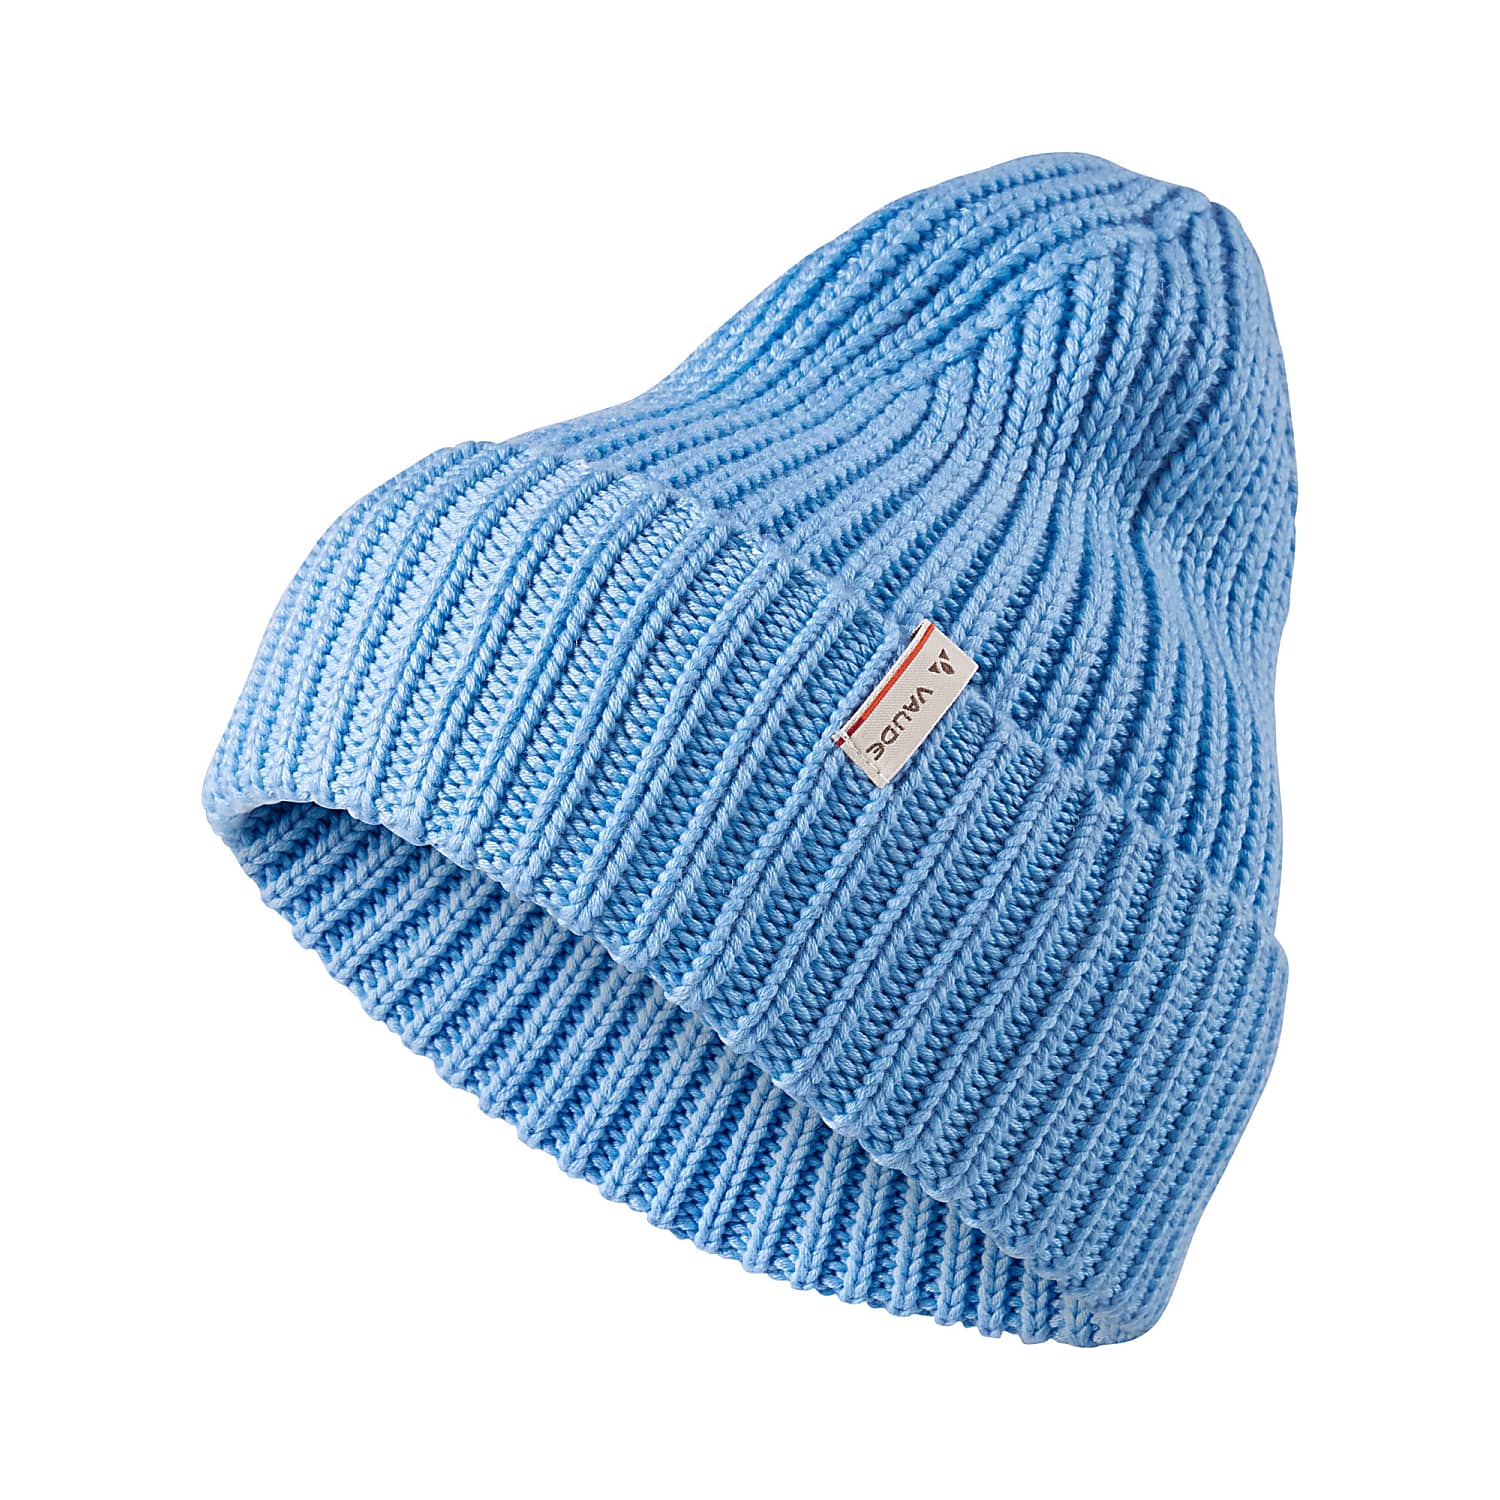 Vaude MOENA BEANIE II, and Pastel Fast Blue cheap shipping 